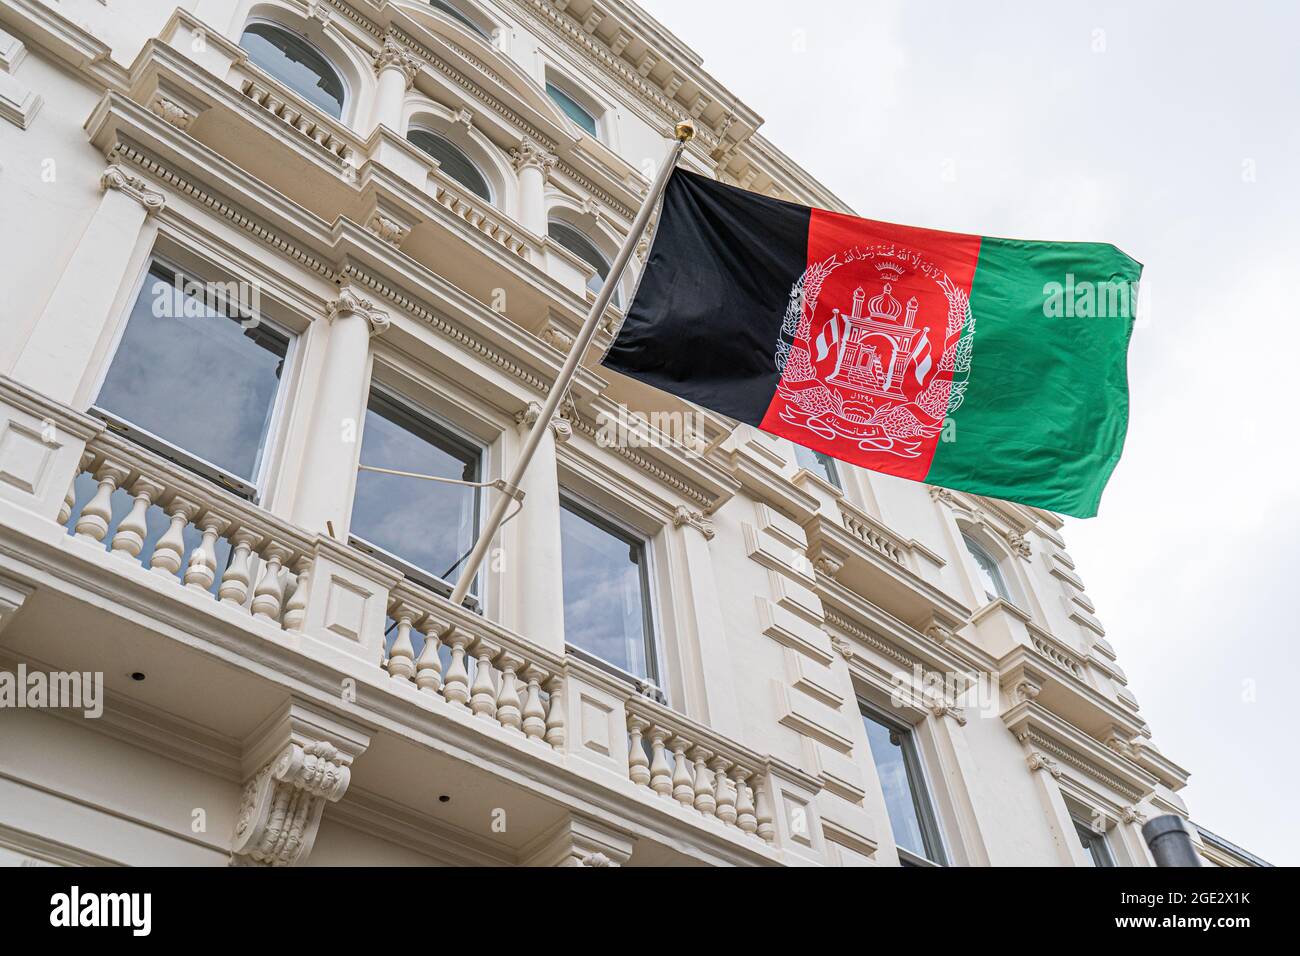 KNIGHTSBRIDGE LONDON 16 August 2021. The flag of Afghanistan government flies above the foreign mission in London which is expected to close within days  as it's  diplomats face an uncertain future after the Taliban seizer power   Credit amer ghazzal/Alamy Live News Stock Photo